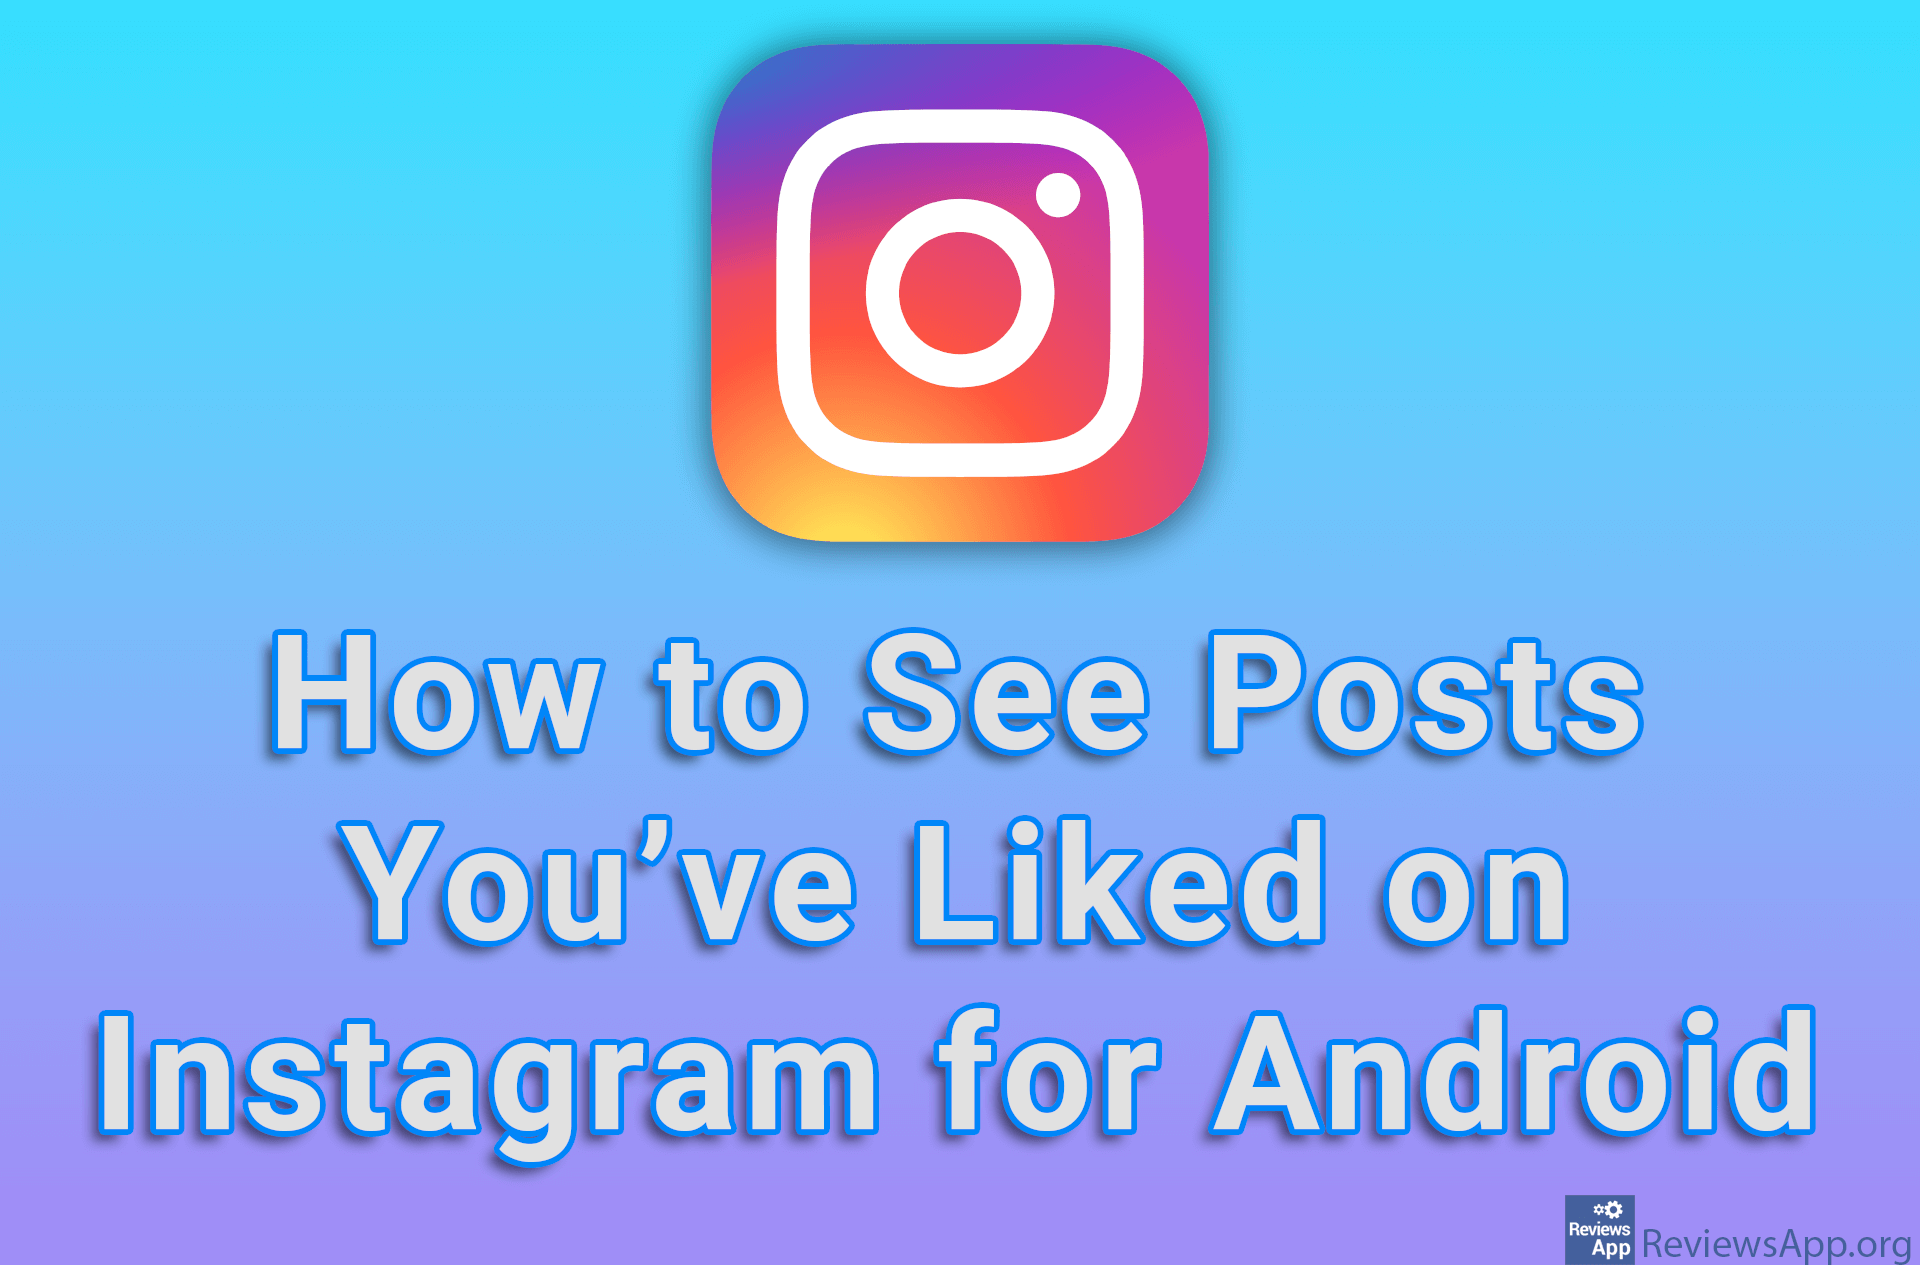 How to See Posts You’ve Liked on Instagram for Android